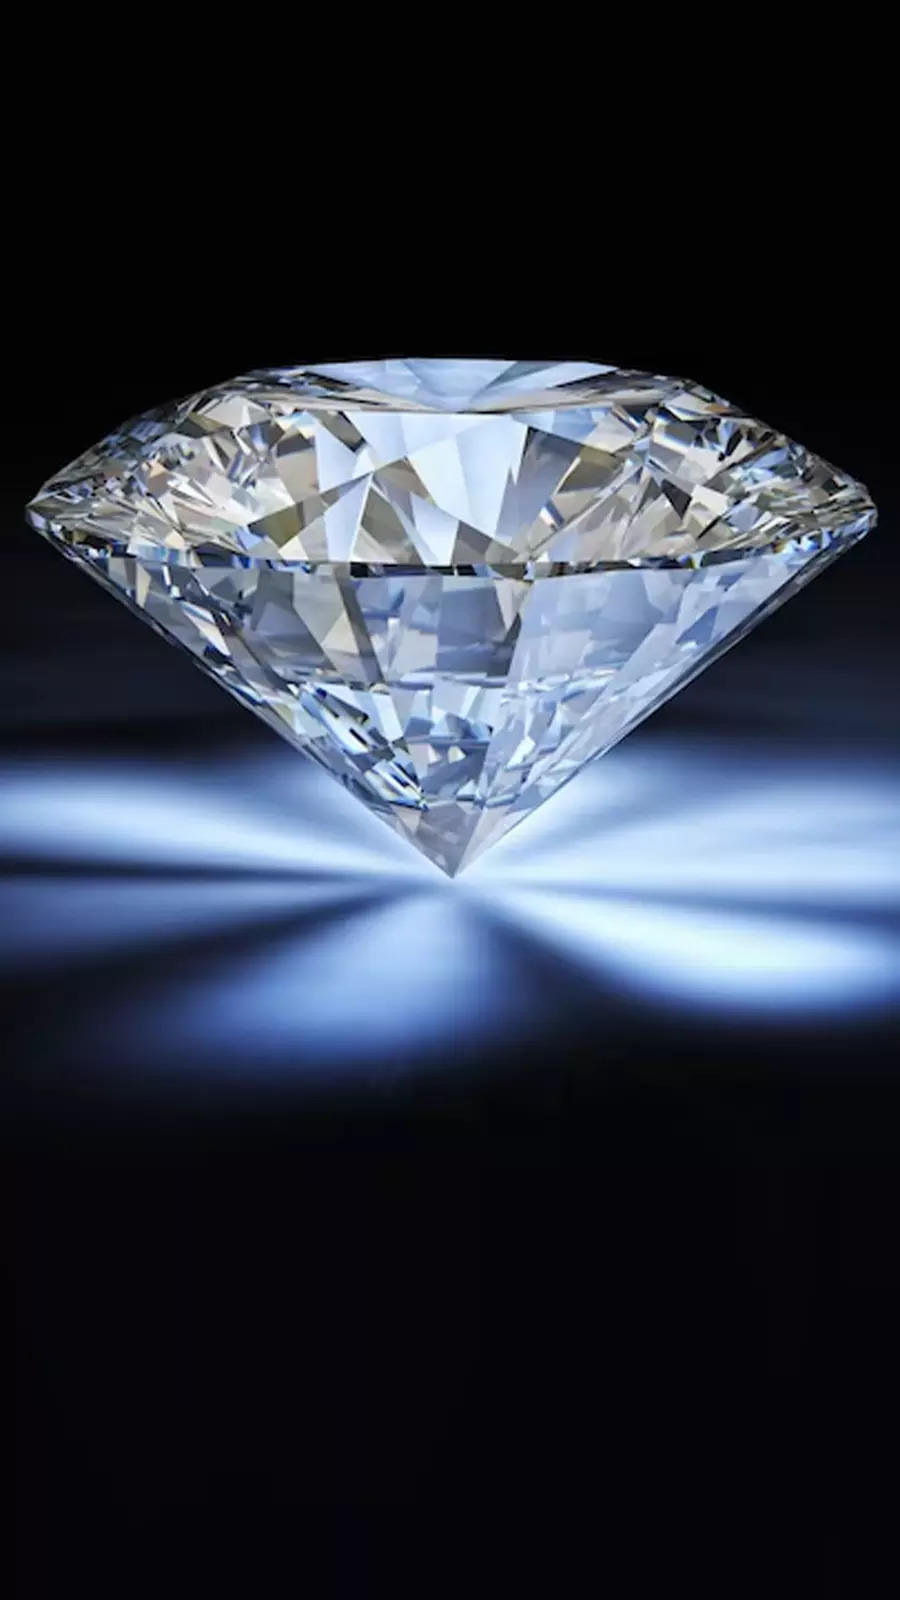 7 Lesser-known Facts About the Kohinoor Diamond